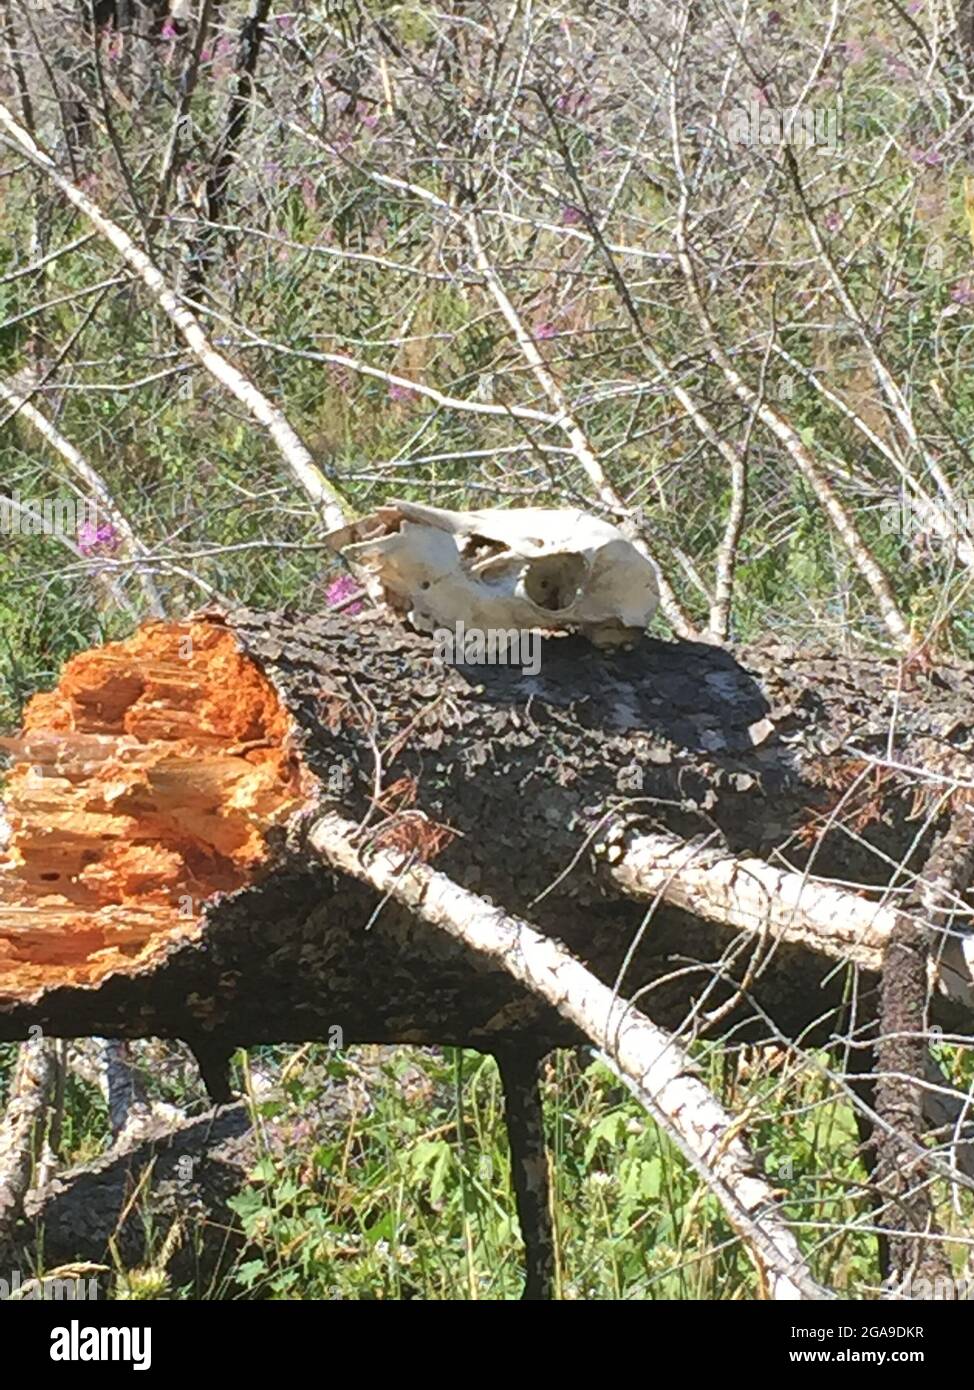 A deer skull on a log in Wyoming Stock Photo